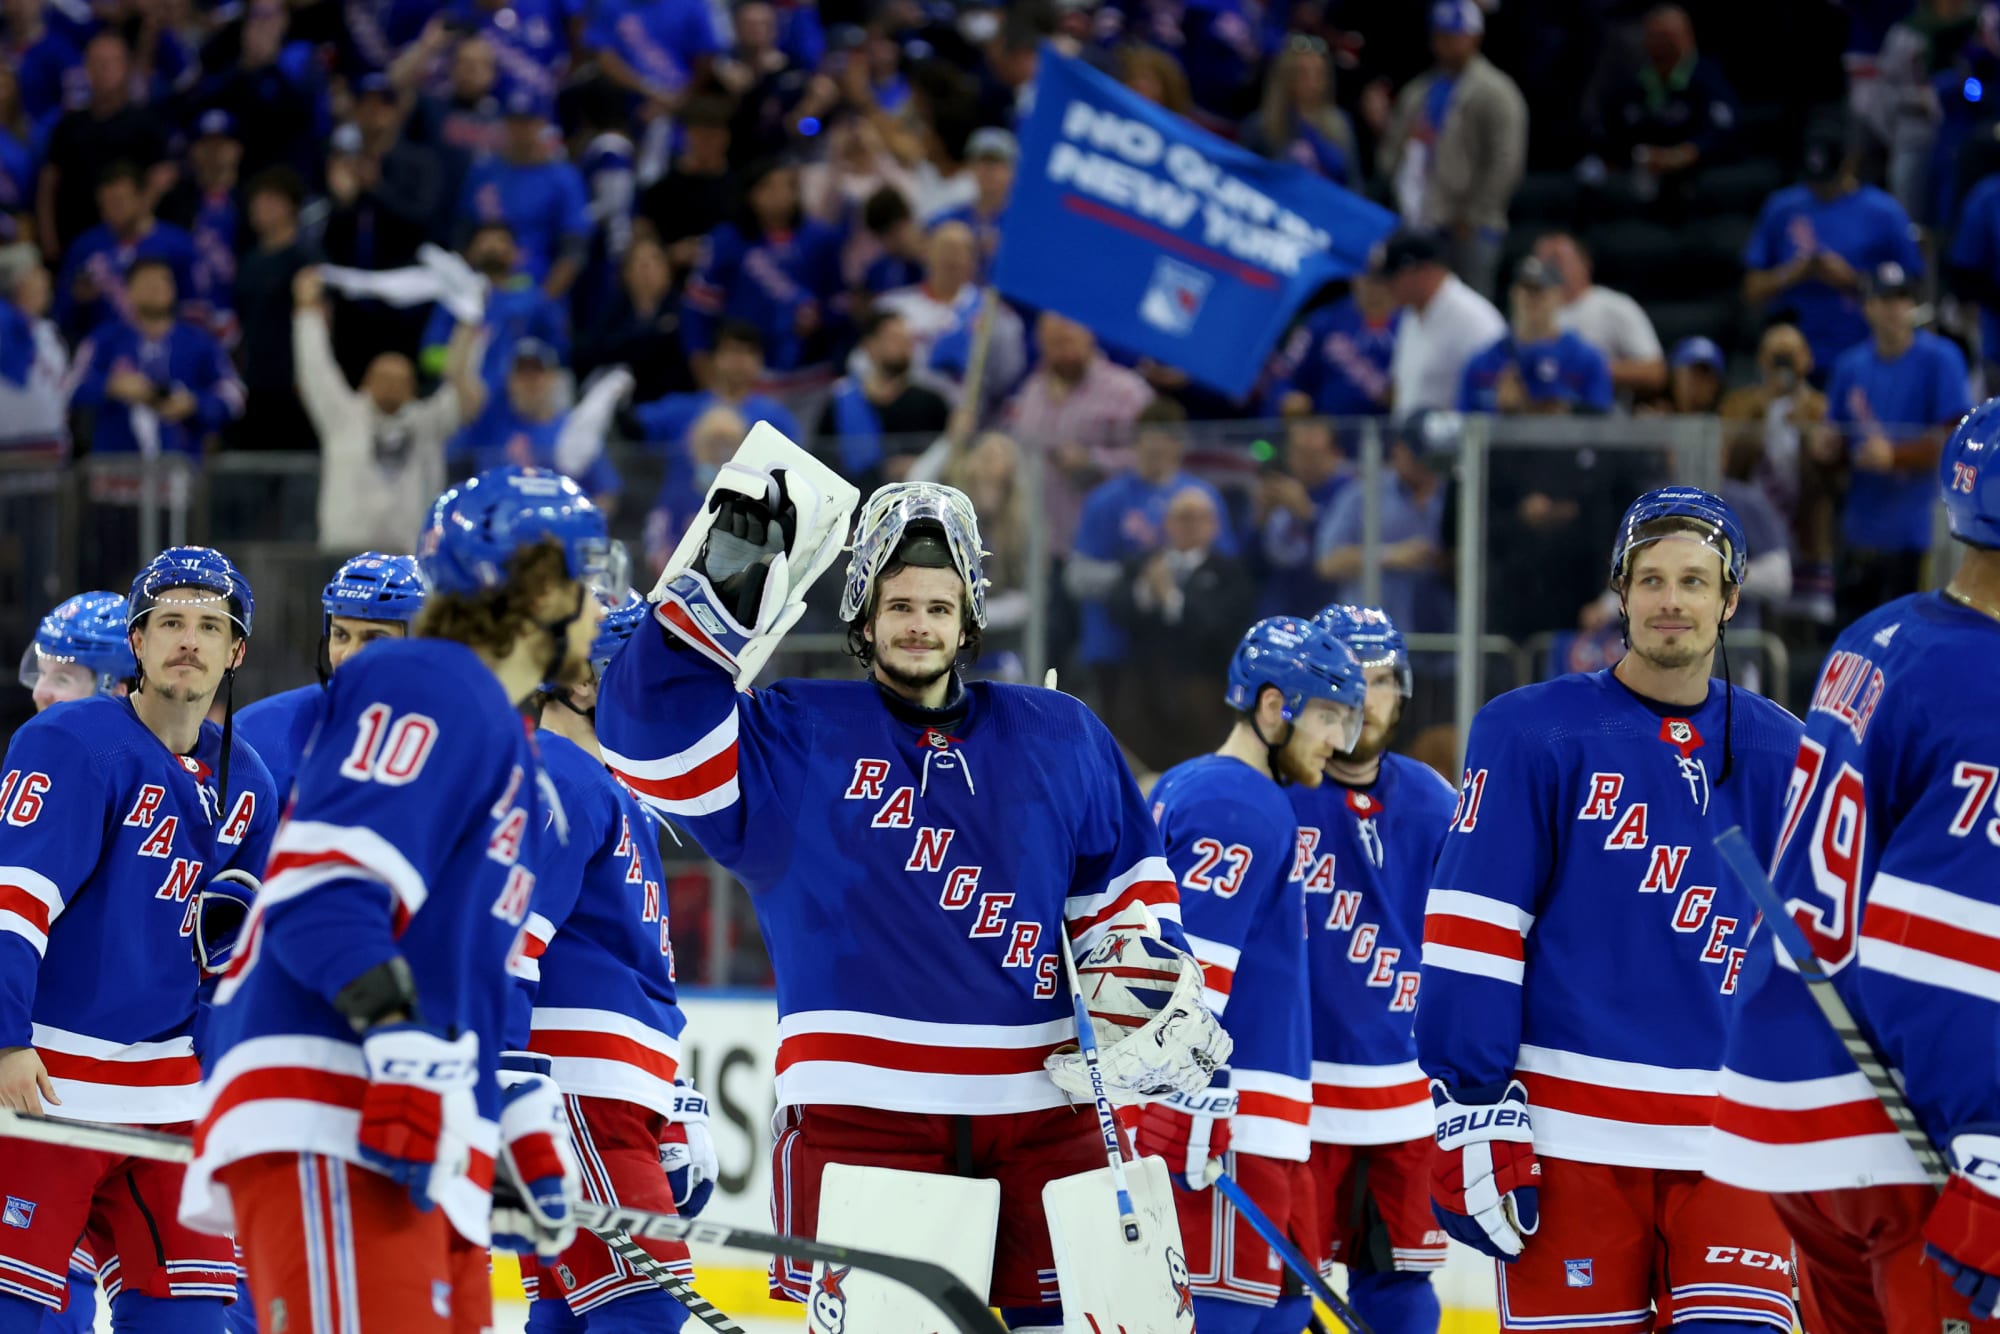 New York Rangers live to play again with 52 Game 6 win